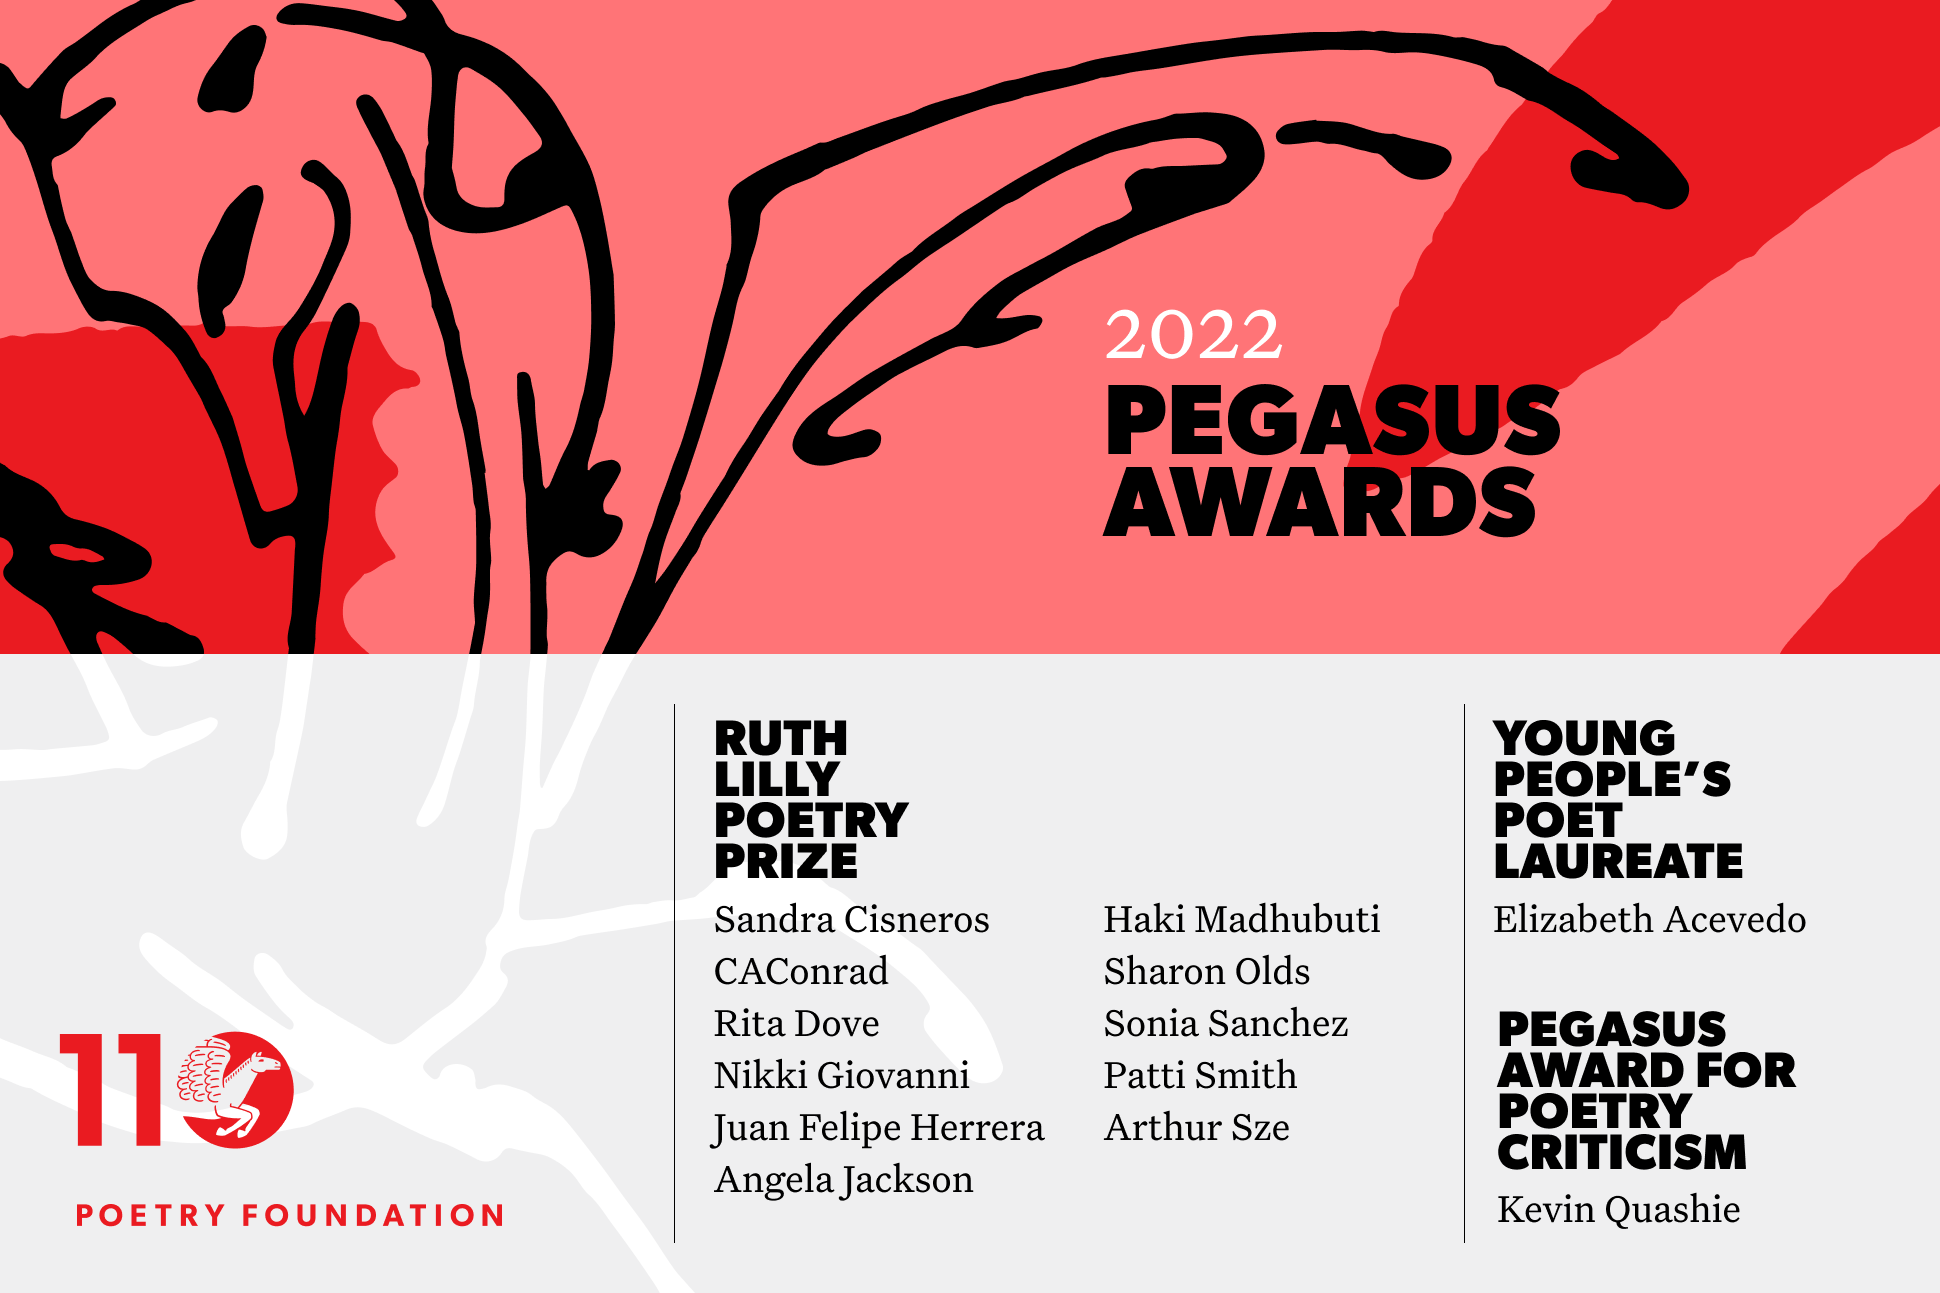 Top half of image has abstract coral and red shapes, overlaid with the phrase "2022 Pegasus Awards." Bottom half lists the winners; details in text of release.